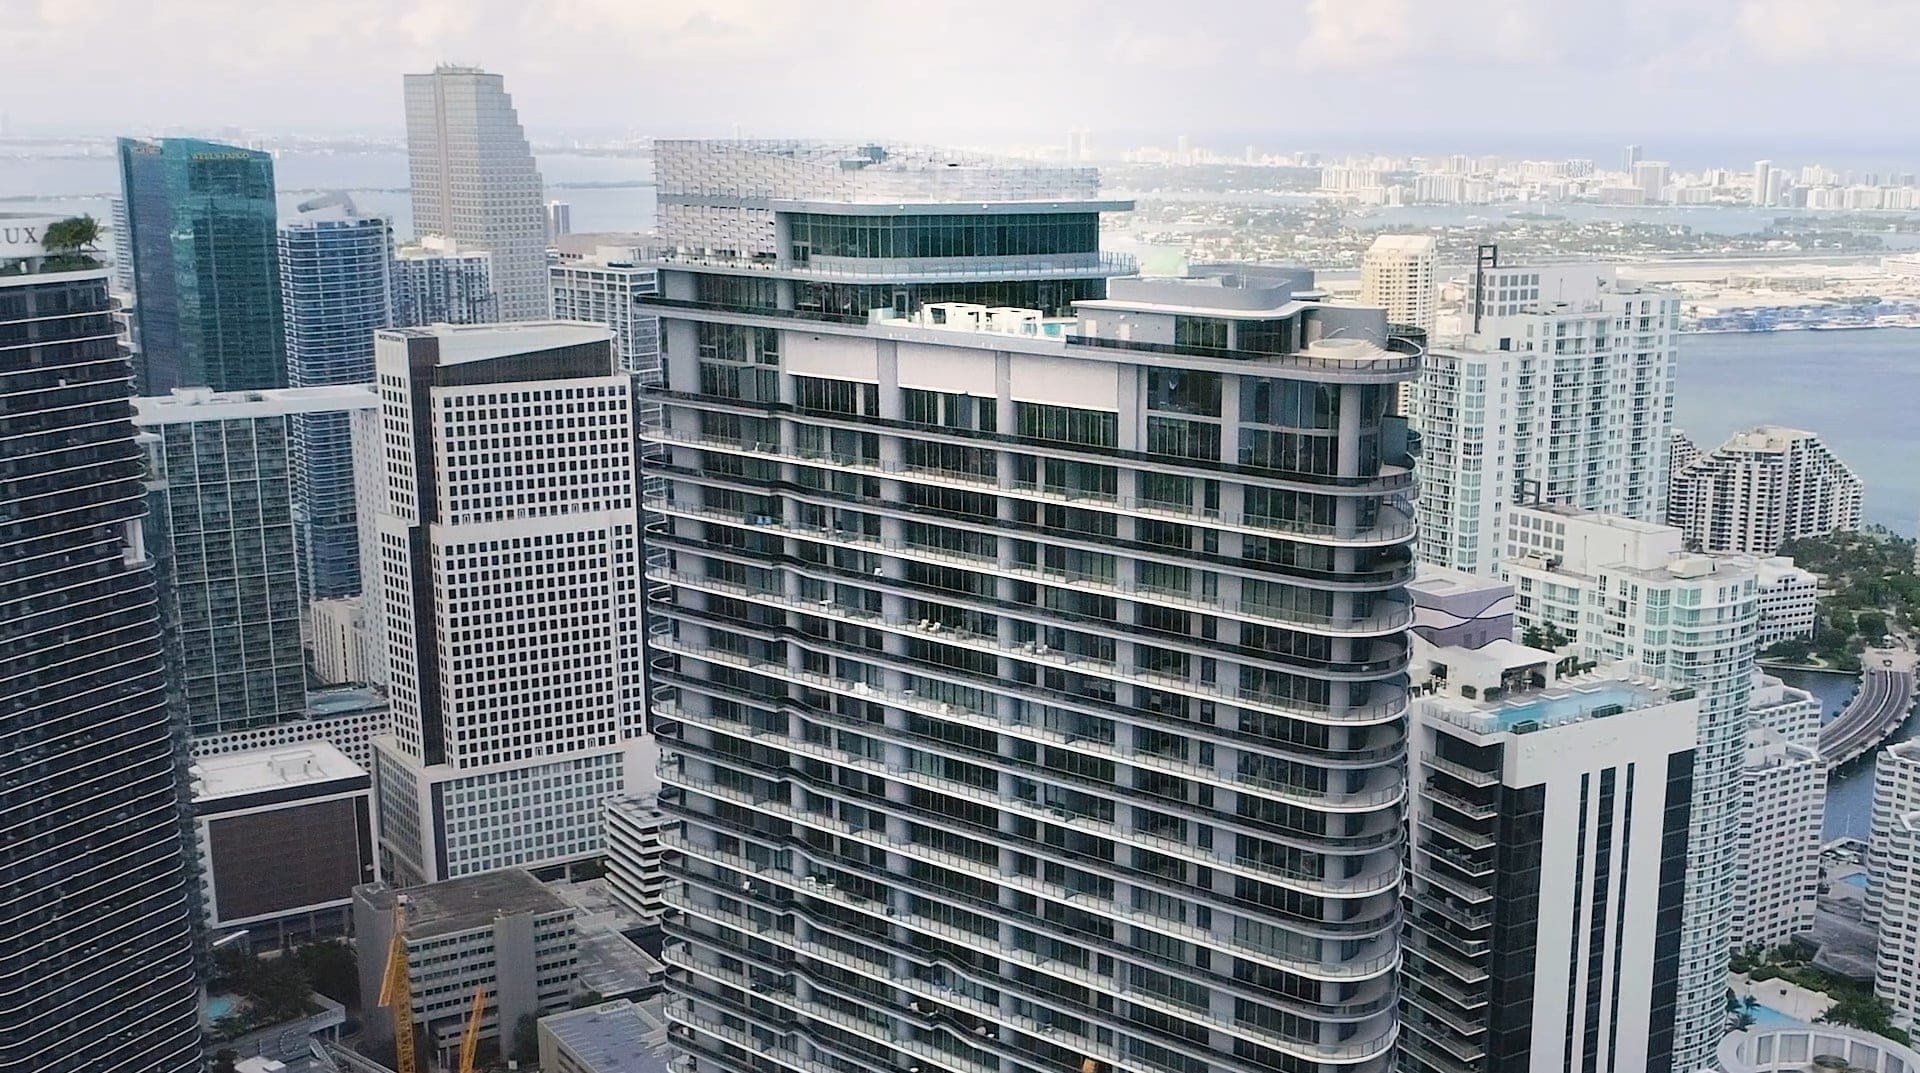 Penthouse facade on top of Brickell Flatiron fabricated by Zahner.